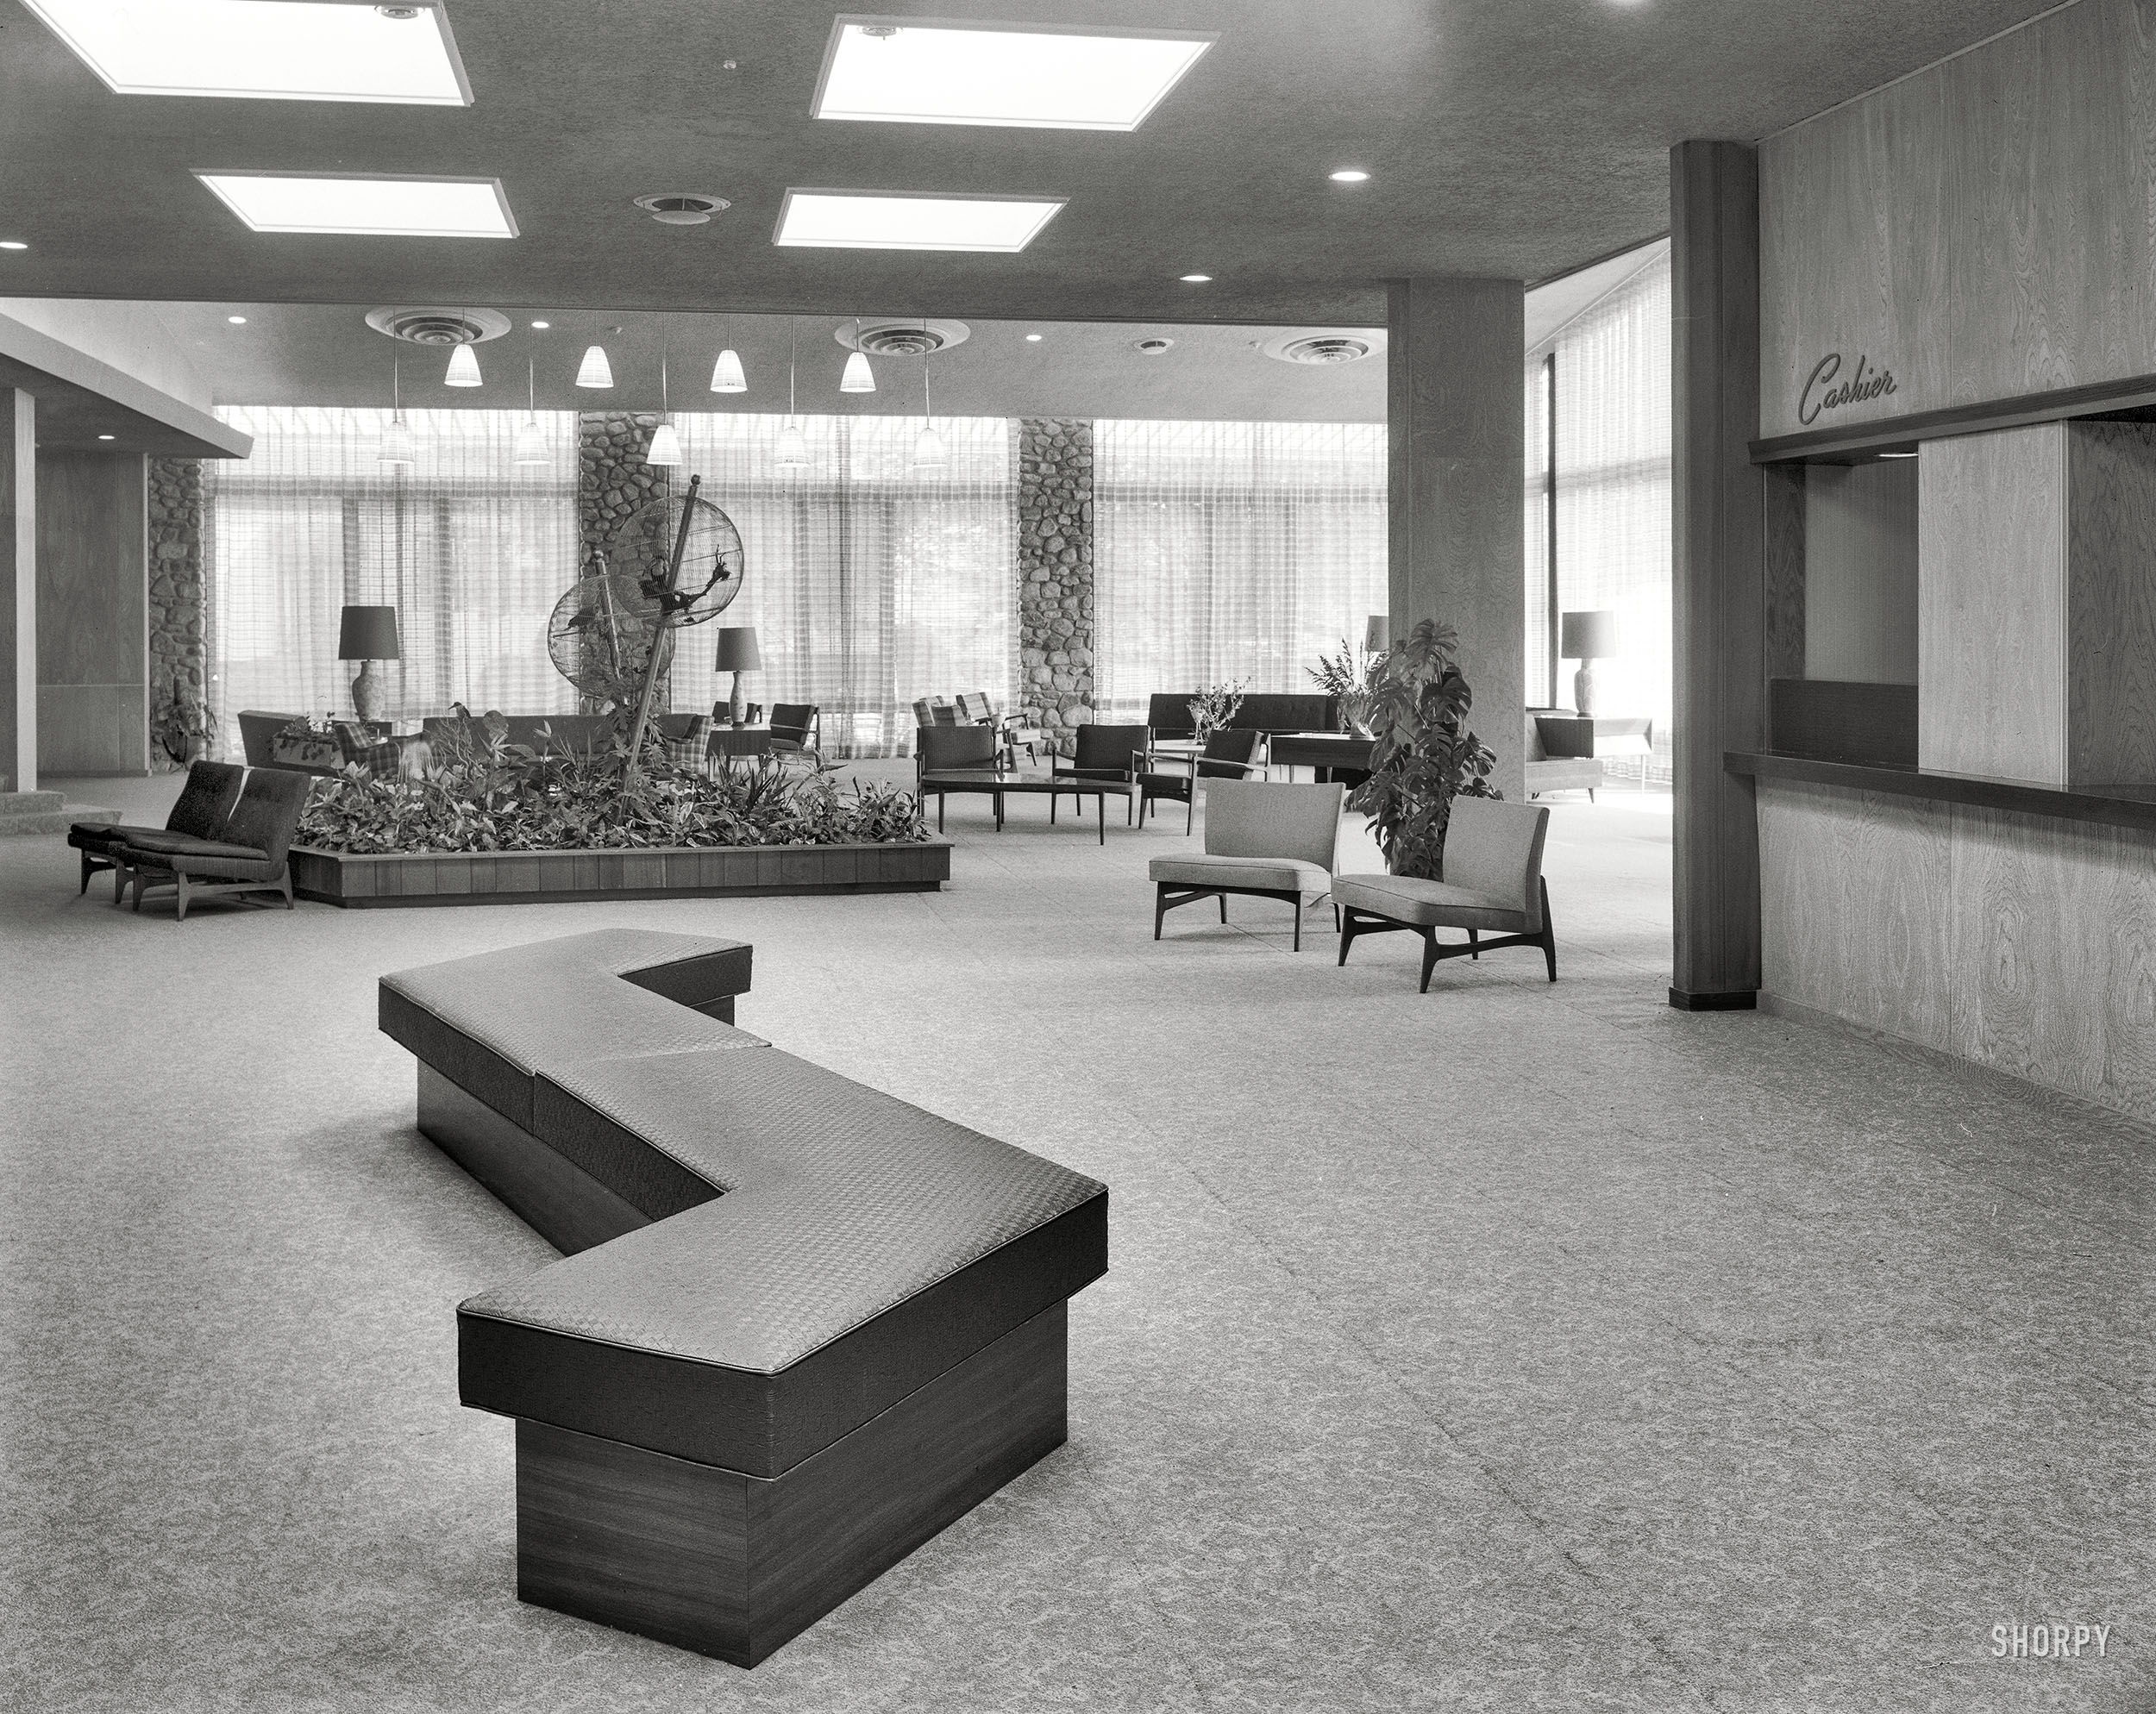 August 13, 1957. "Tamarack Lodge, Greenfield Park, New York. General view of lobby." Large-format acetate negative by Gottscho-Schleisner. View full size.